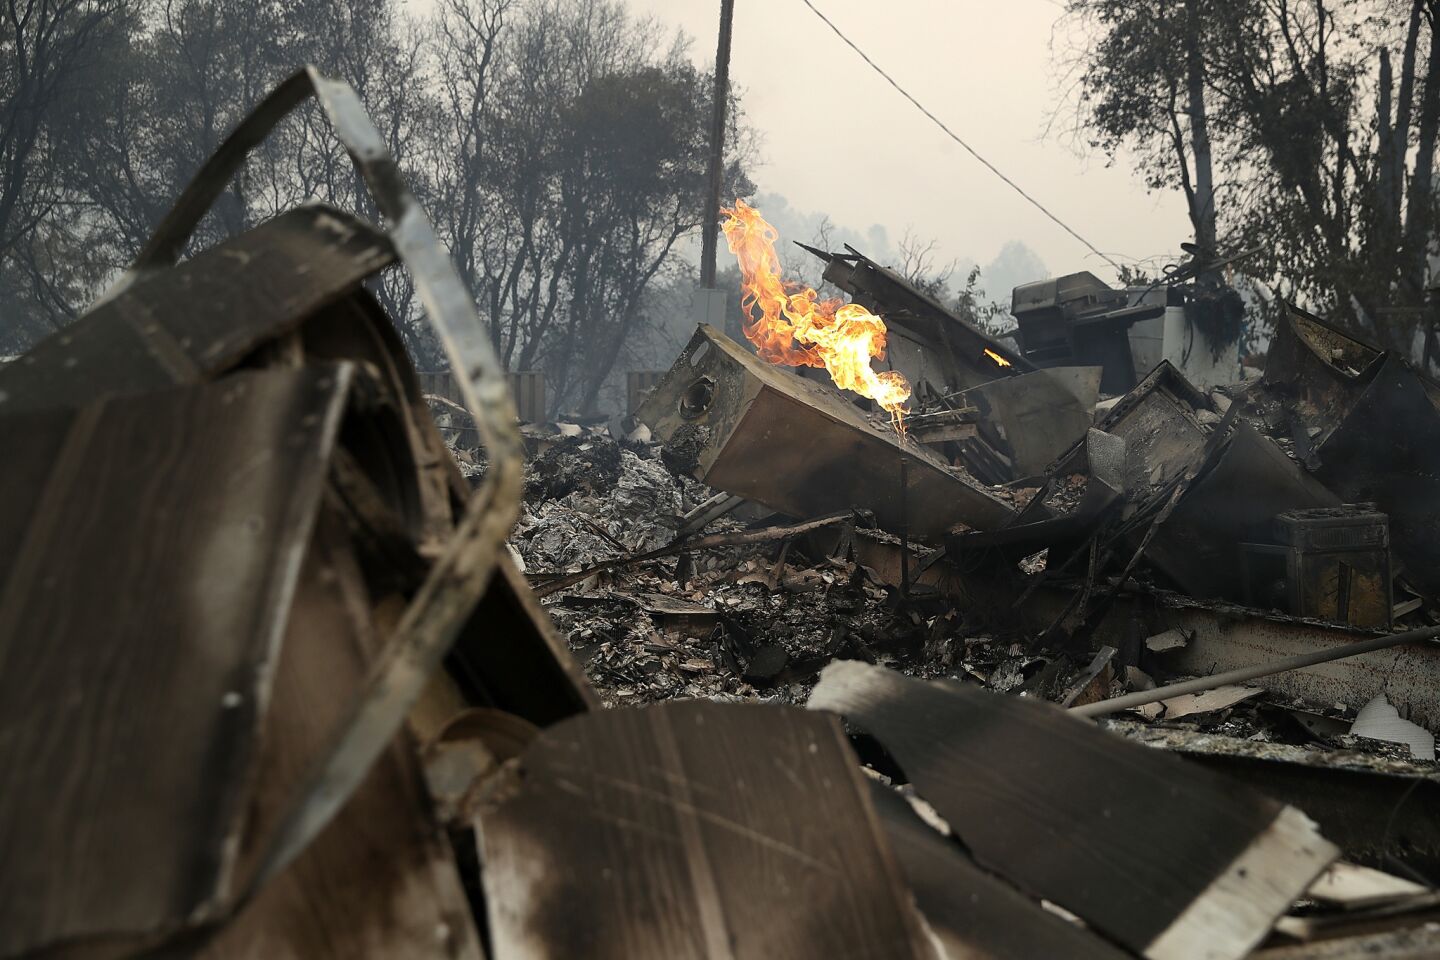 A gas line continues to burn at a home destroyed by the Detwiler fire in Mariposa, Calif.